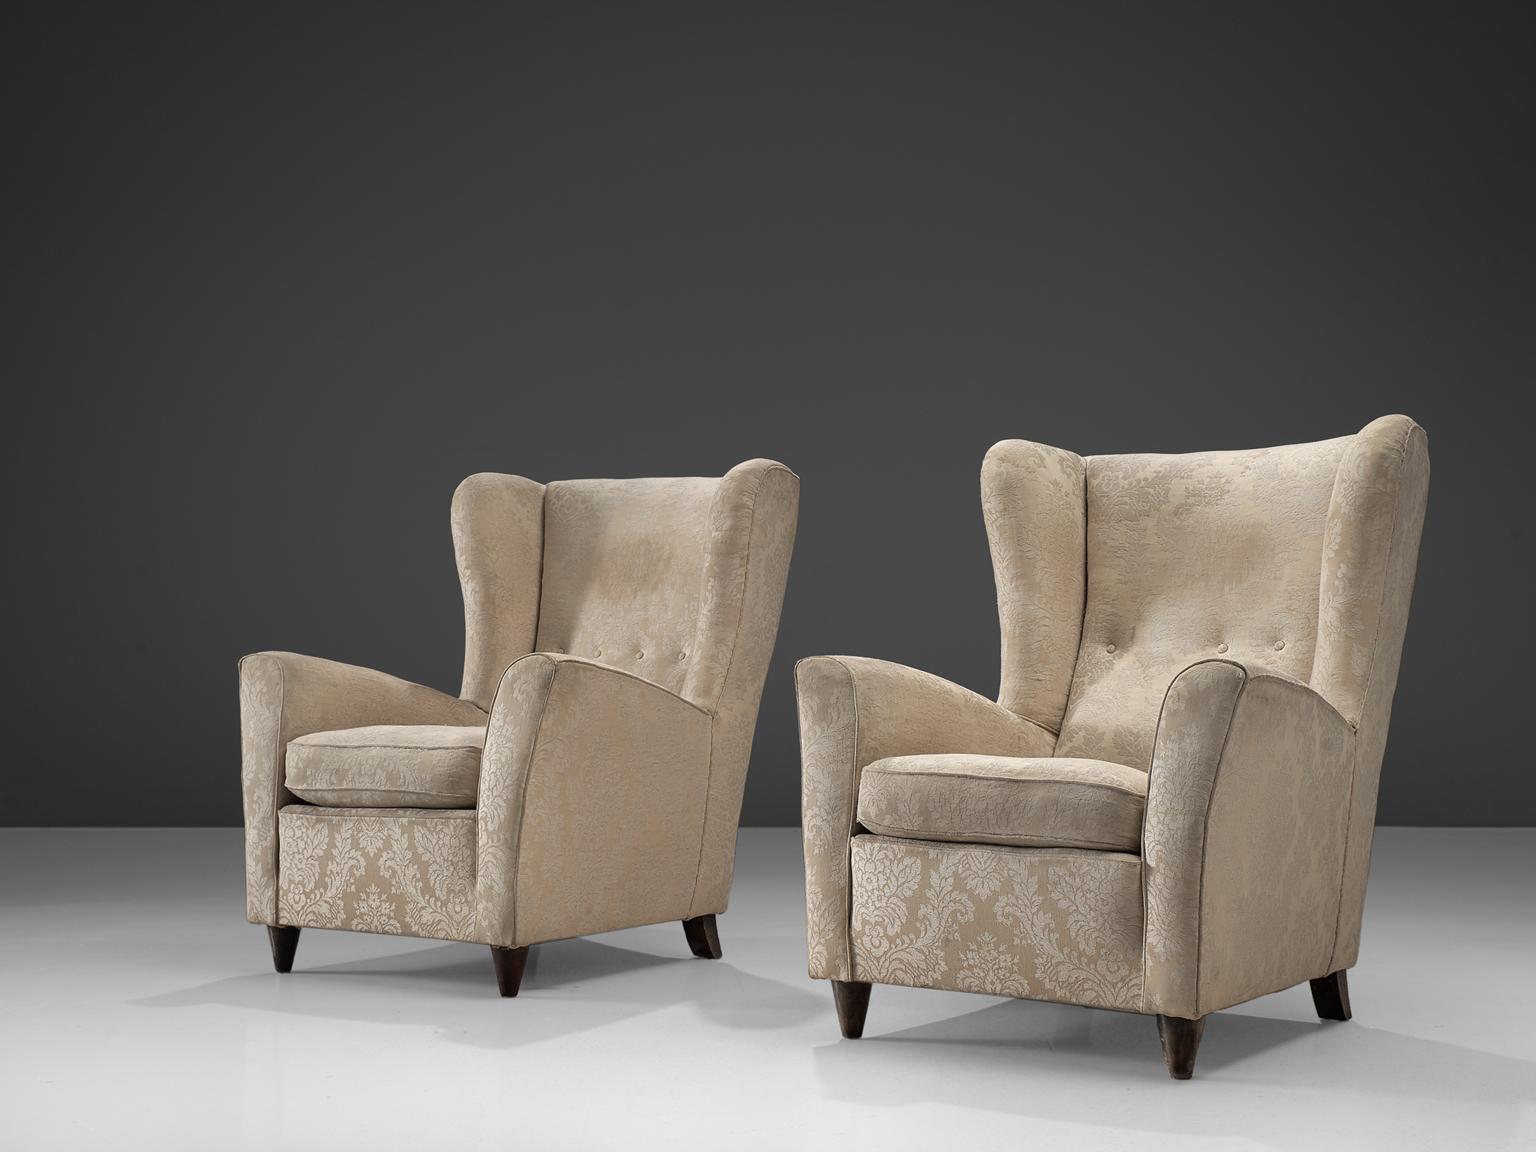 Pair of wingback chairs, stained beech legs, sand to off-white fabric, Denmark, 1950s. 

This pair of easy chairs has a grand wing and a buttoned back. The construction of the seat is based on delicate lines and curves that contribute to the chair's